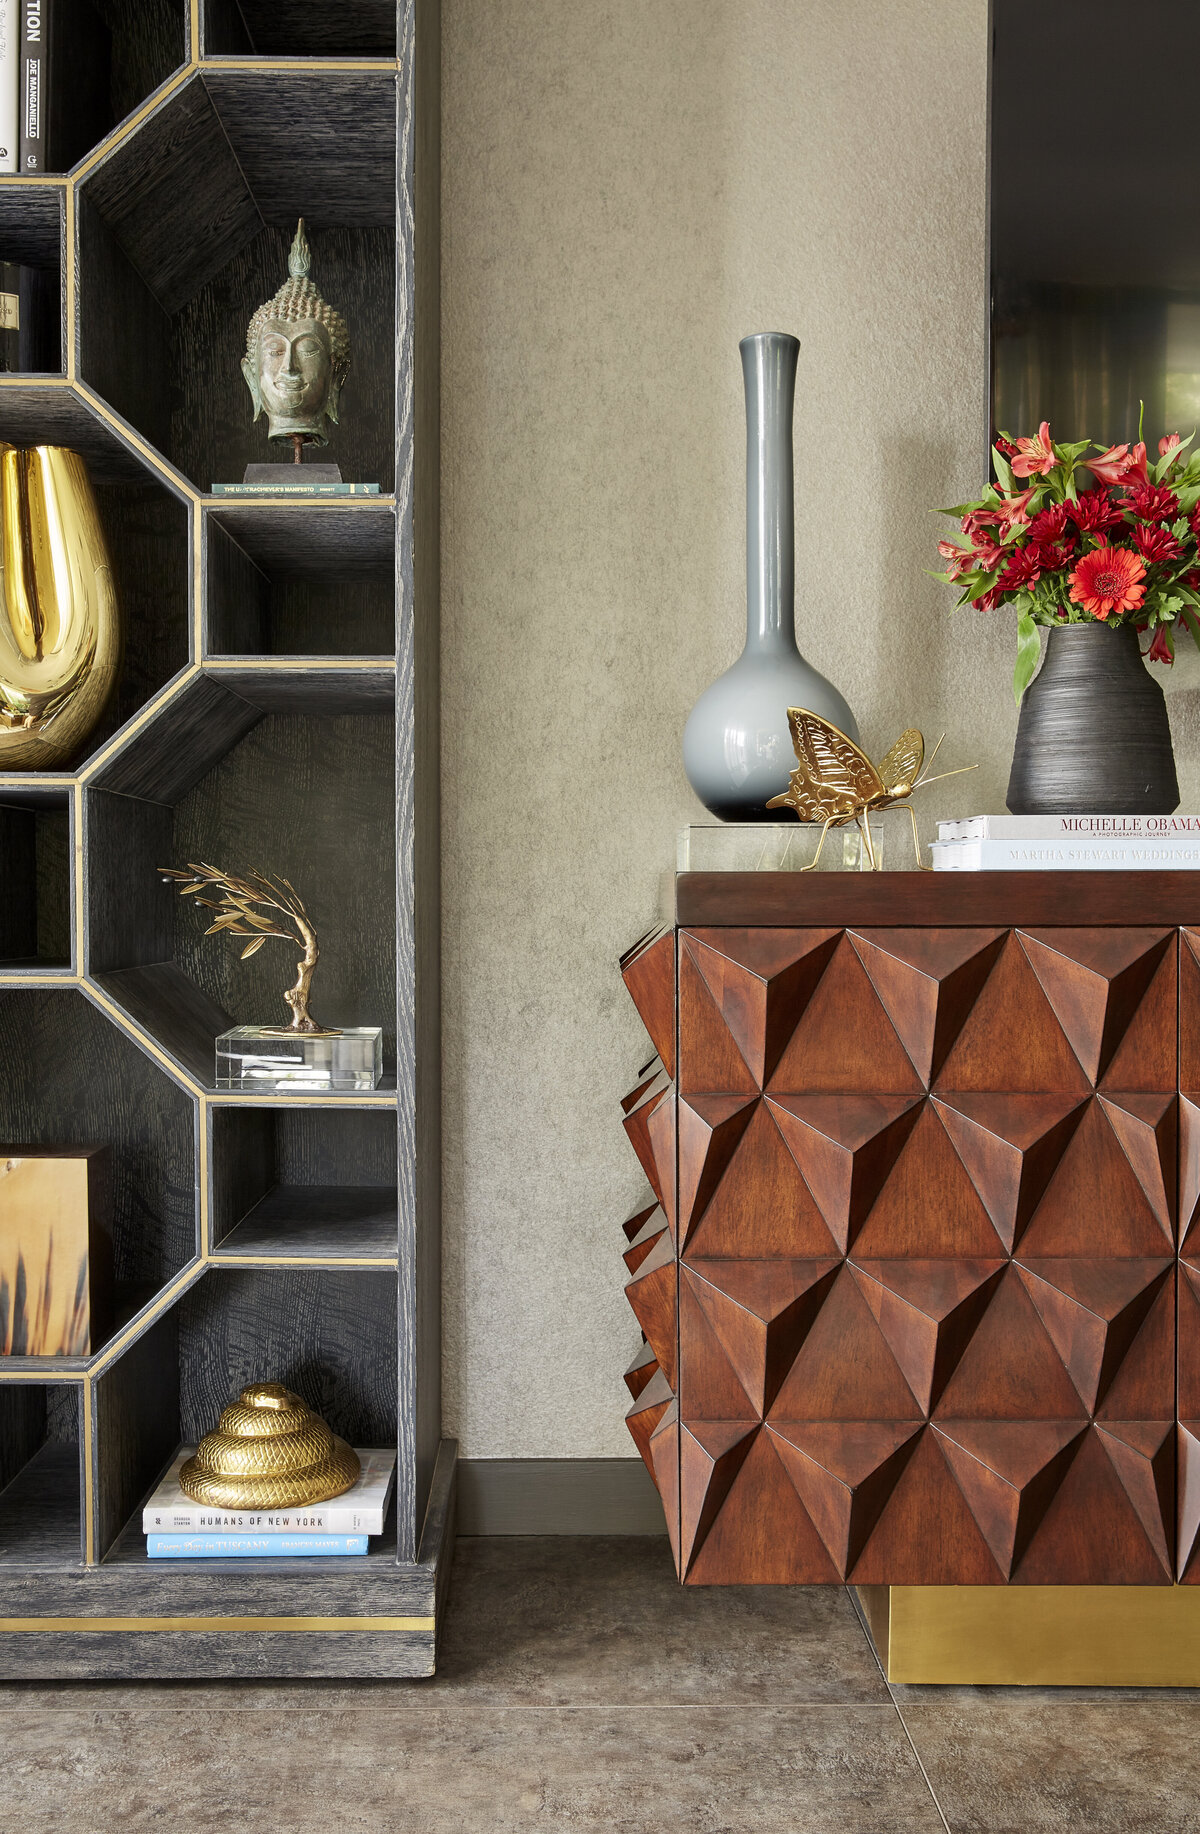 Geometric Texture Wall Side Table and Decorative Item Shelf